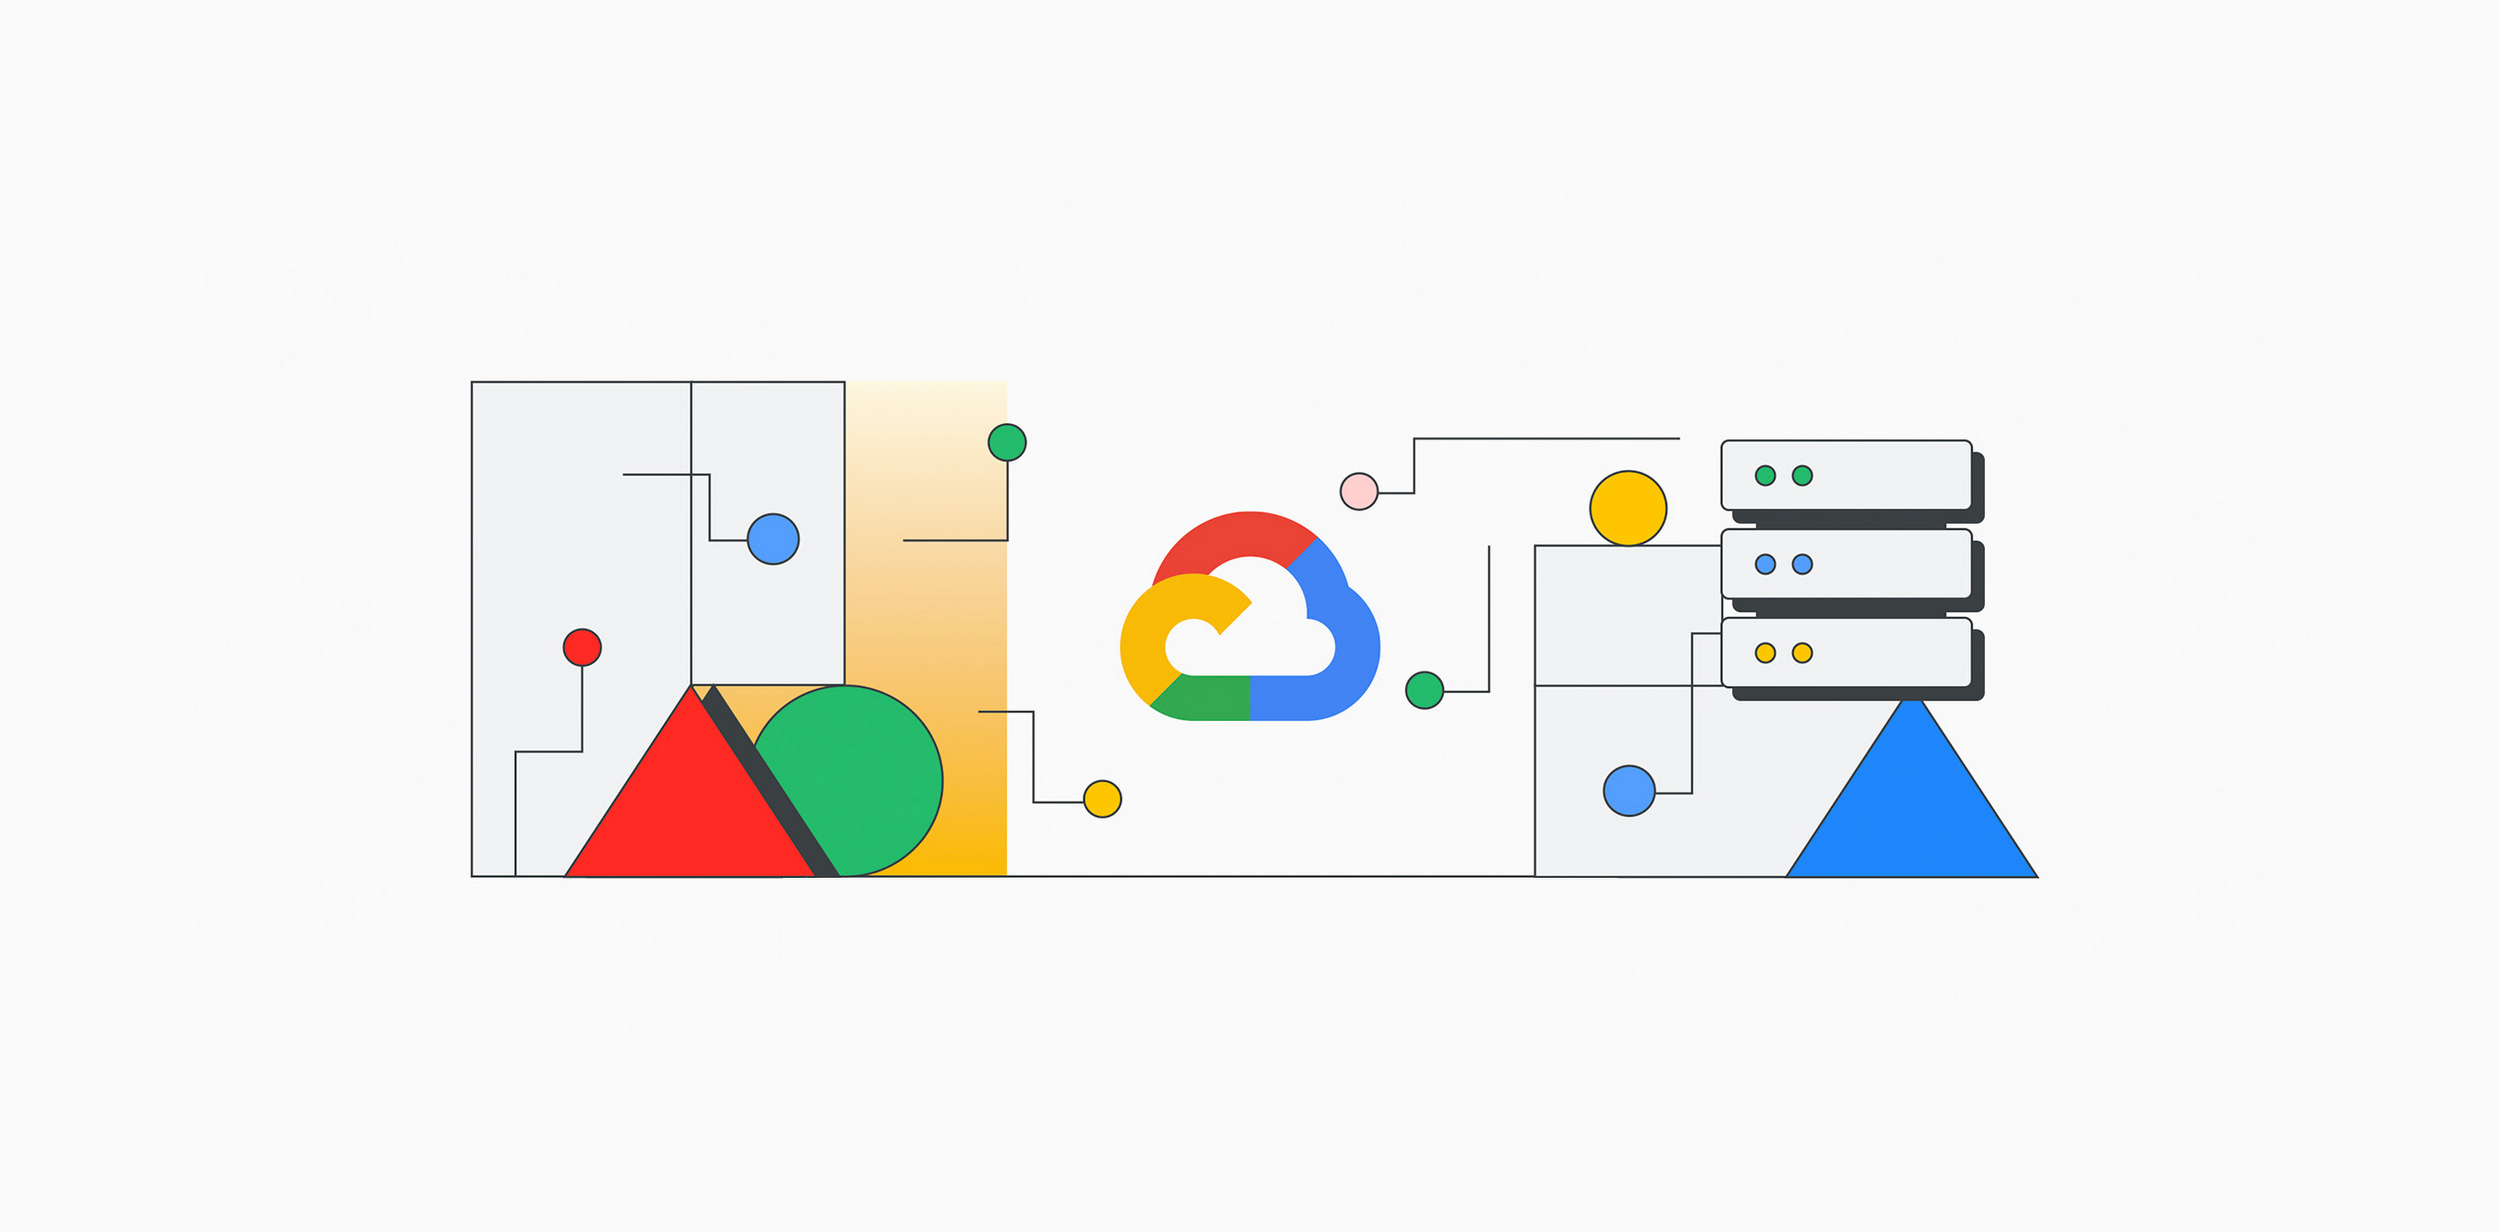 Re: New Challenge: Show off your cloud skills by c - Google Cloud  Community